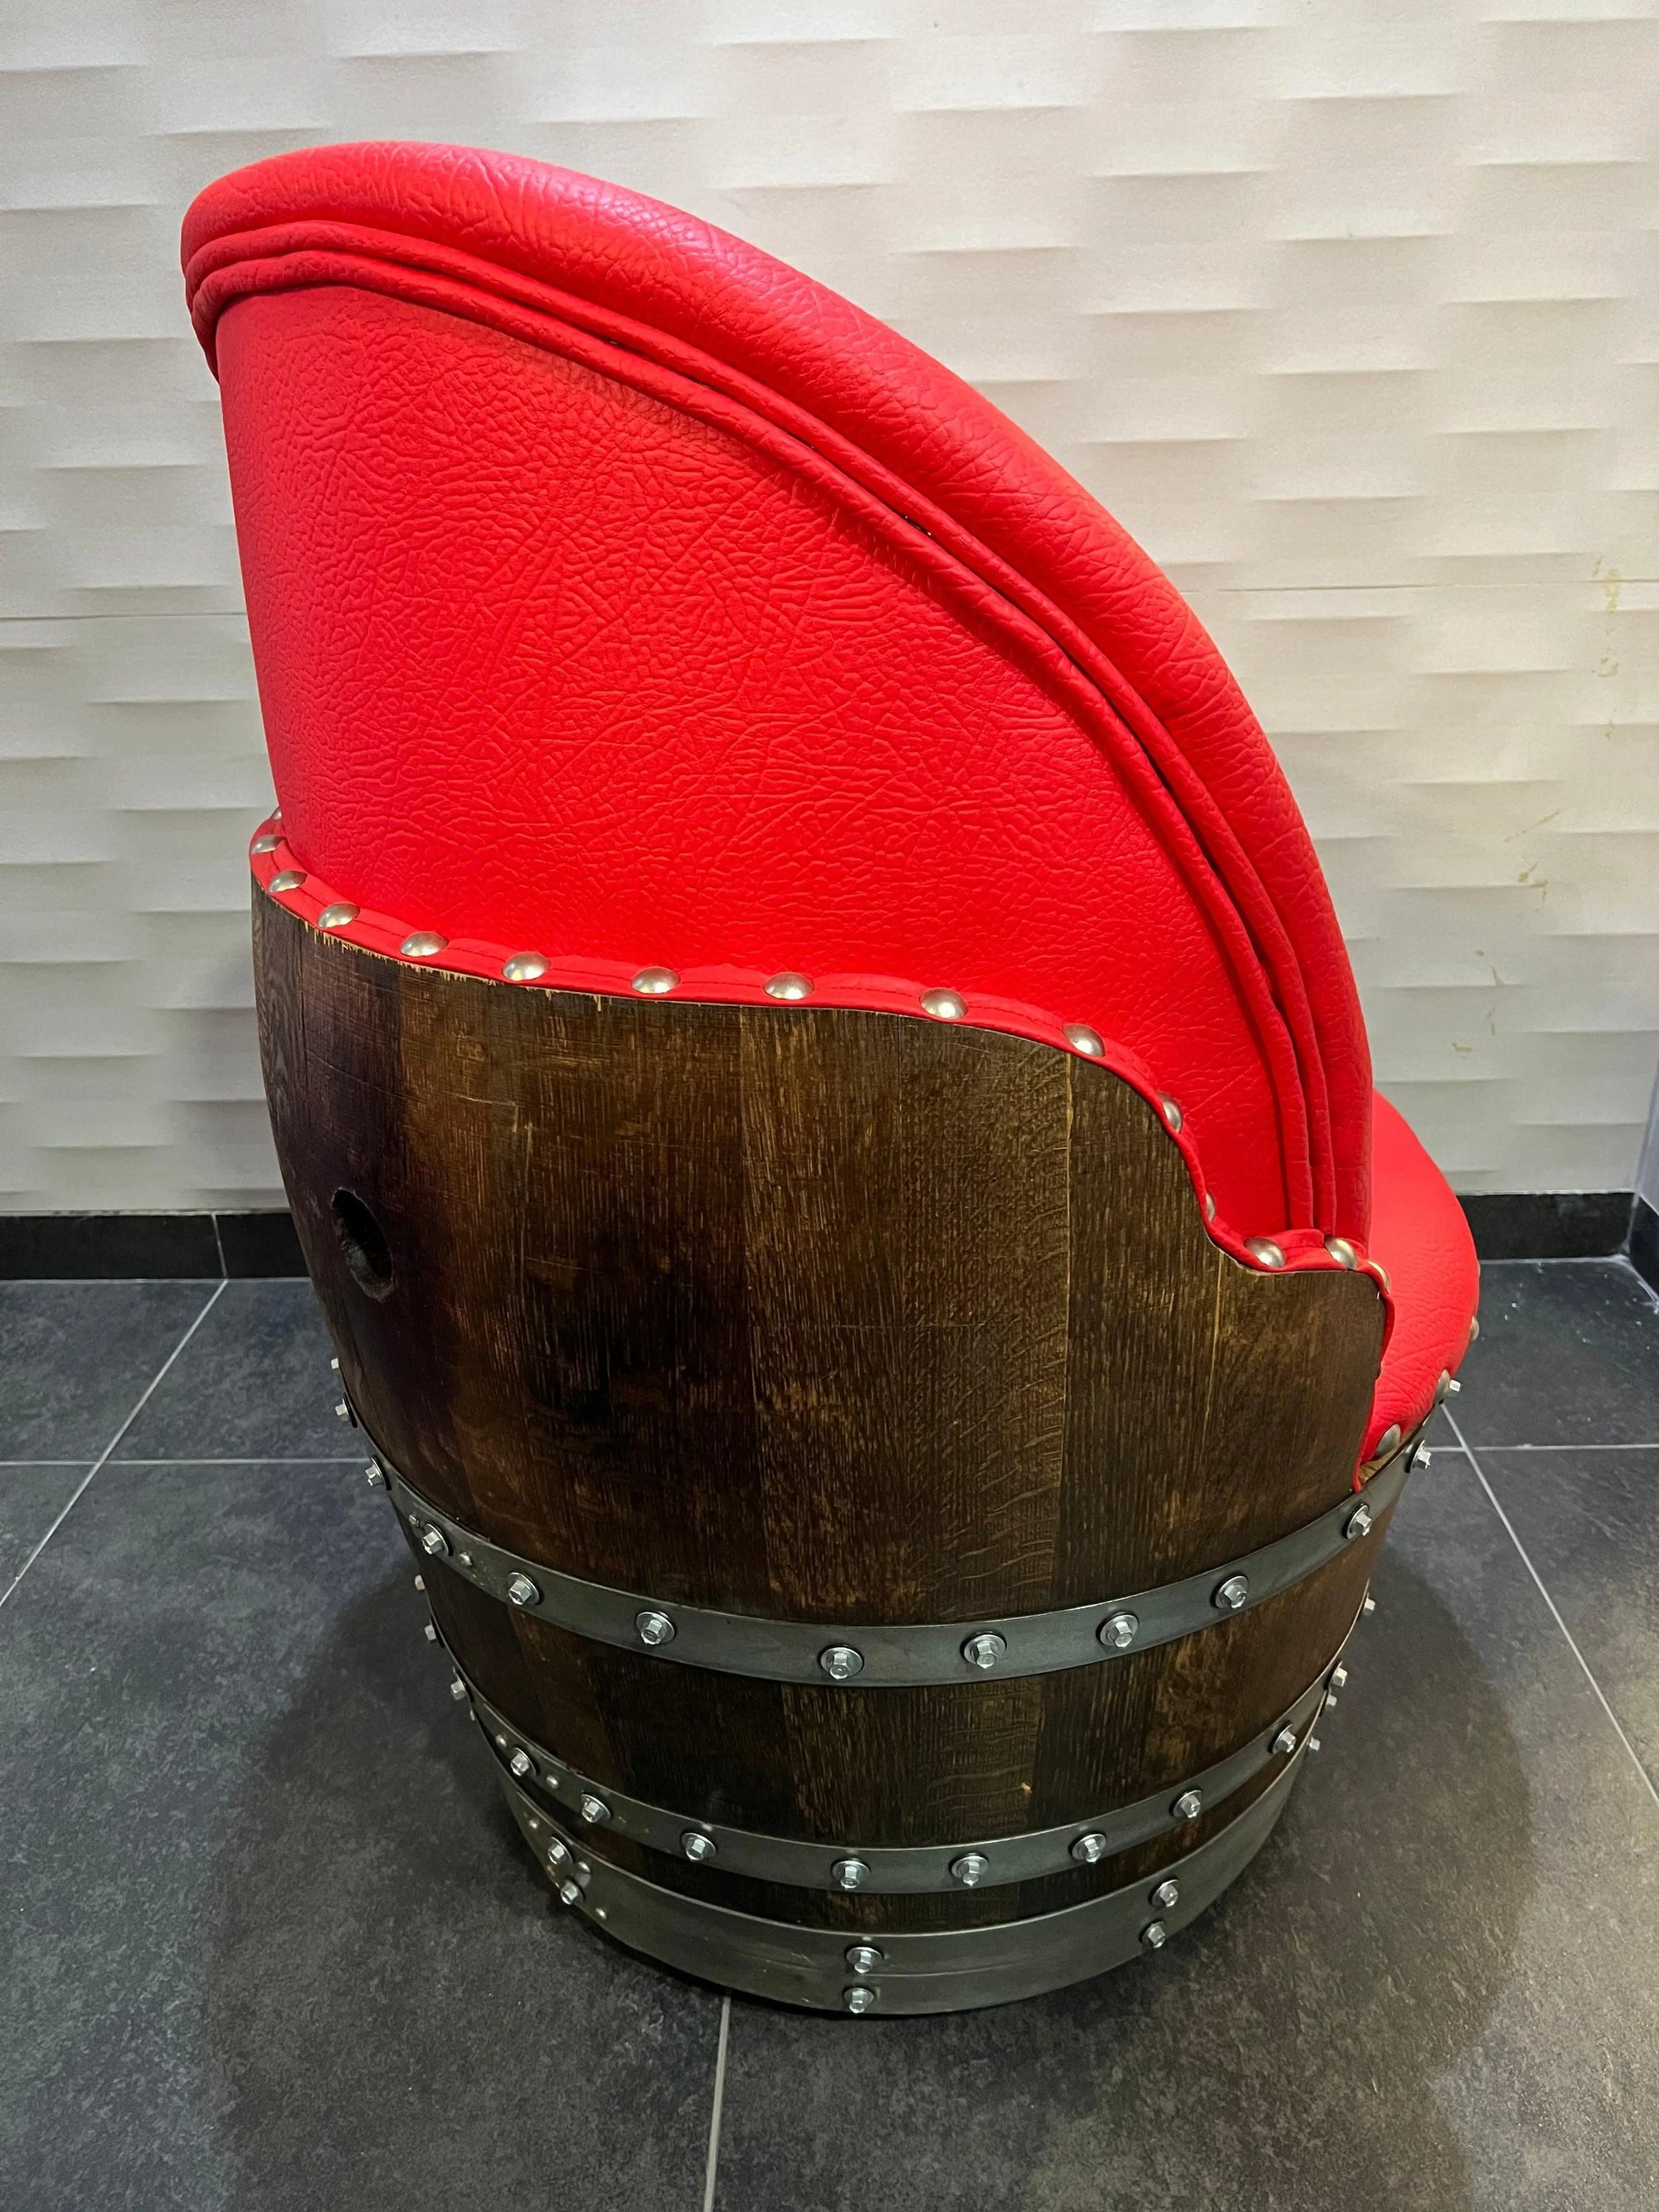 Wine Barrel Chair Red (Limited Colorway) - Oak Wood Wine Barrels. wine barrel coffee table barrel glass top wine barrel glass top whiskey barrel glass top bourbon barrel glass top barrel coffee table barrel wine rack wine barrel table whiskey barrel whiskey barrel table wine barrel handma